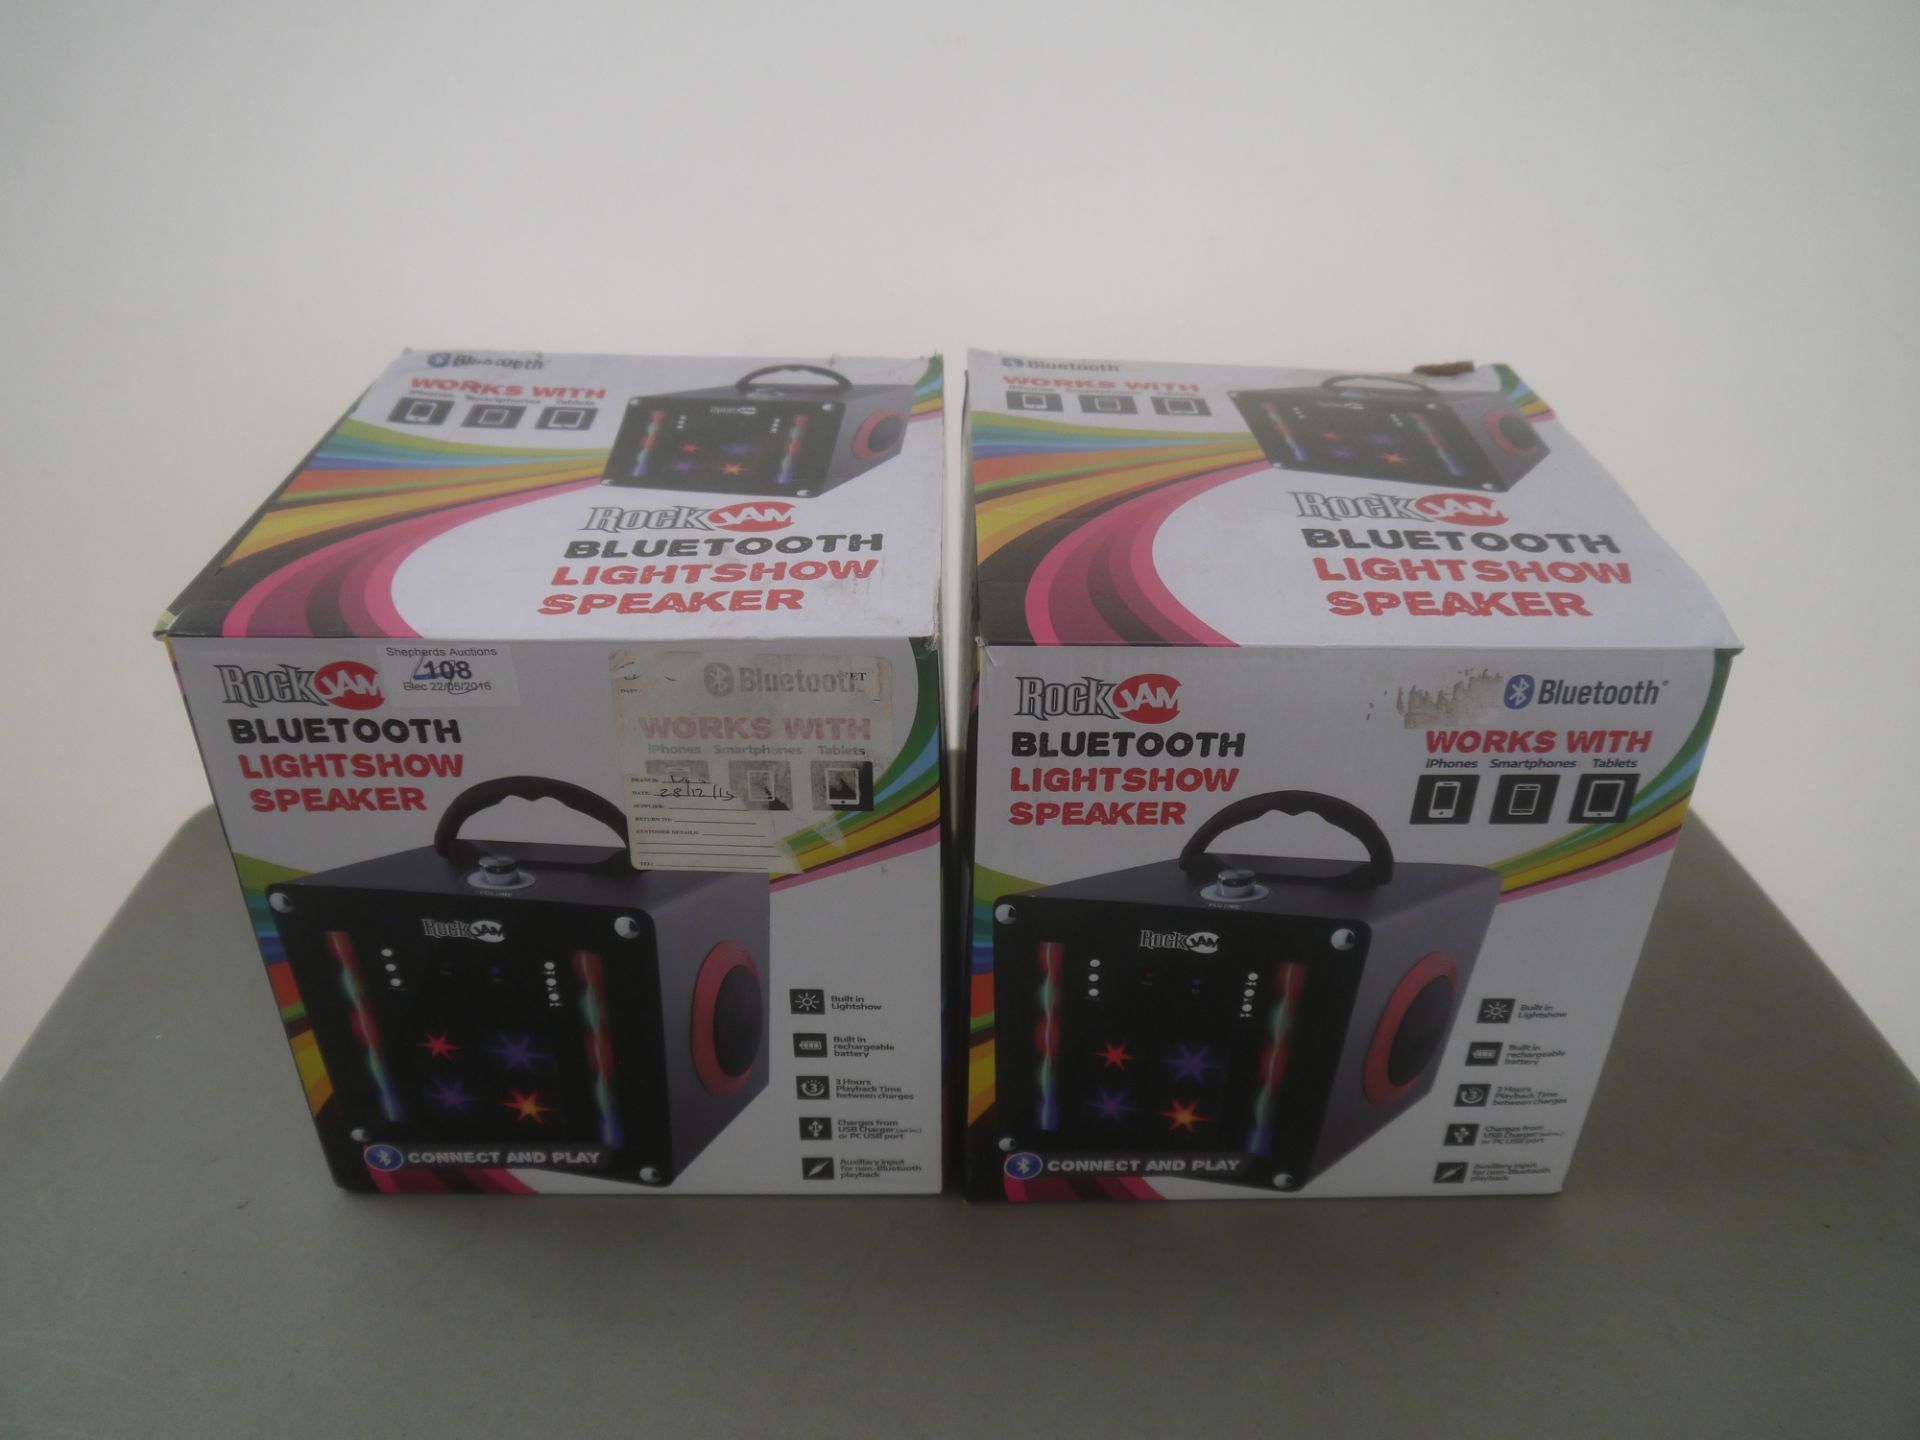 2x Rock Jam Bluetooth lightshow speaker, unchecked and boxed.